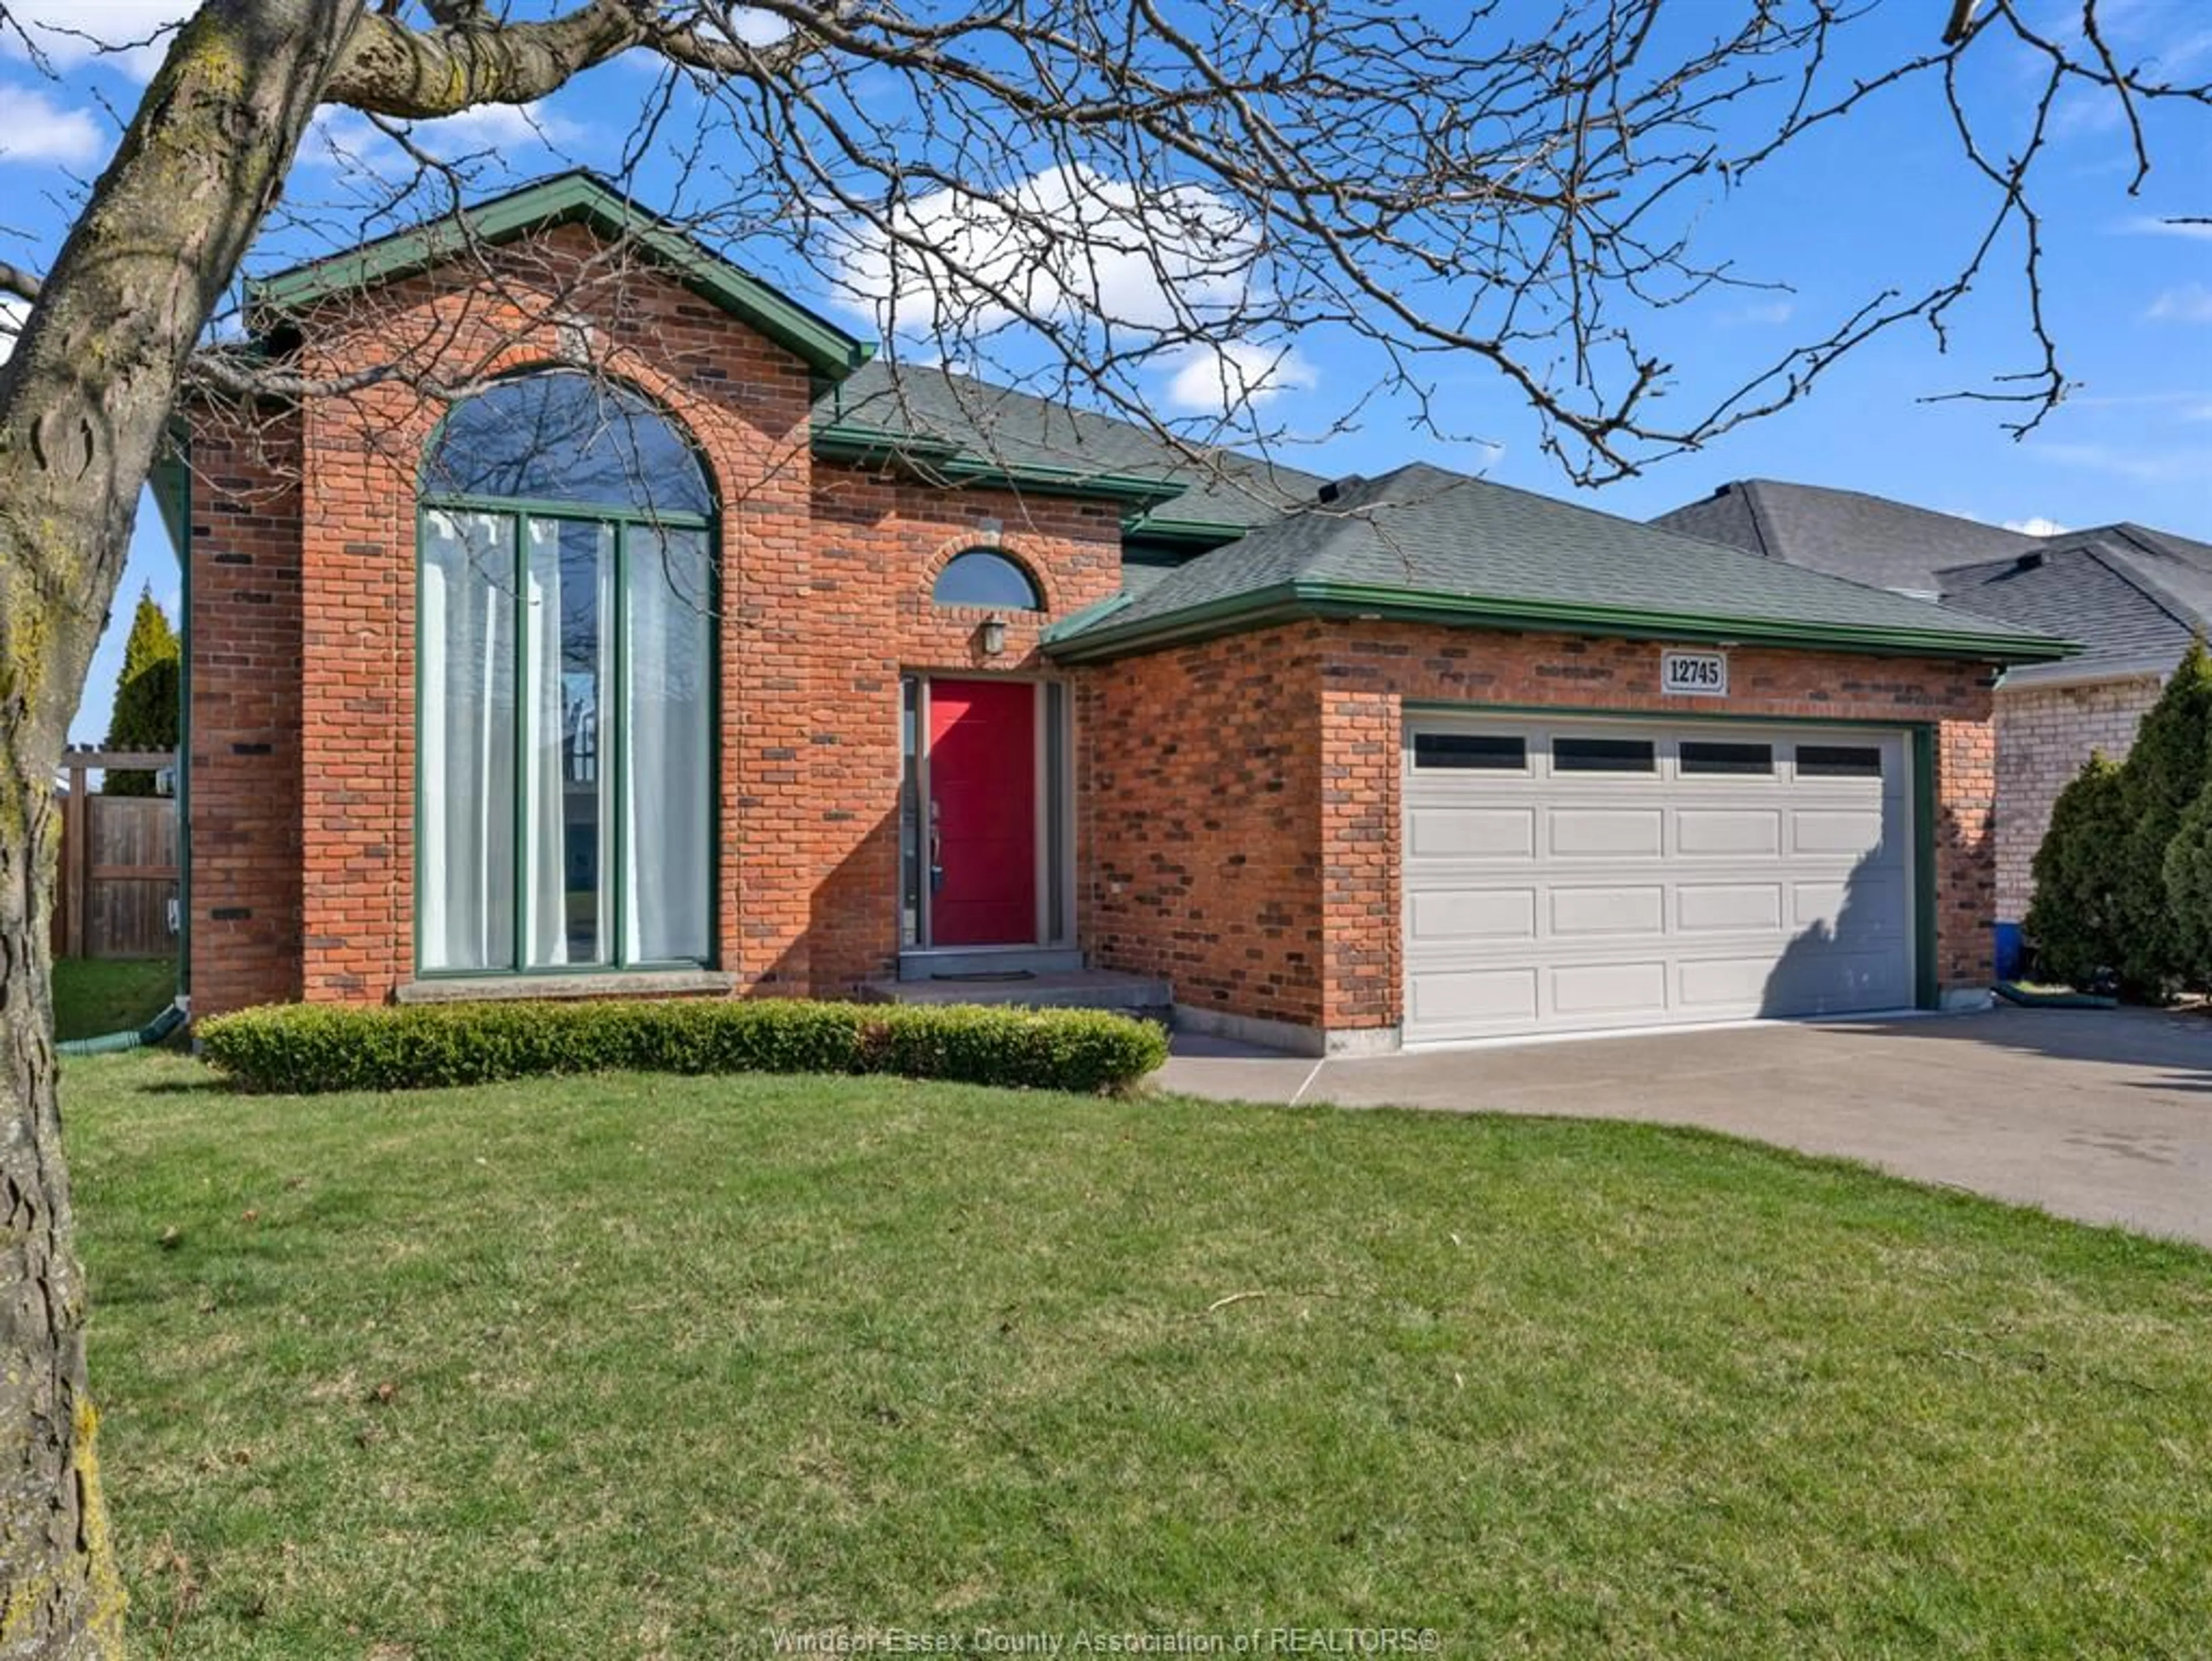 Home with brick exterior material for 12745 LEMIRE St, Tecumseh Ontario N8N 4V9